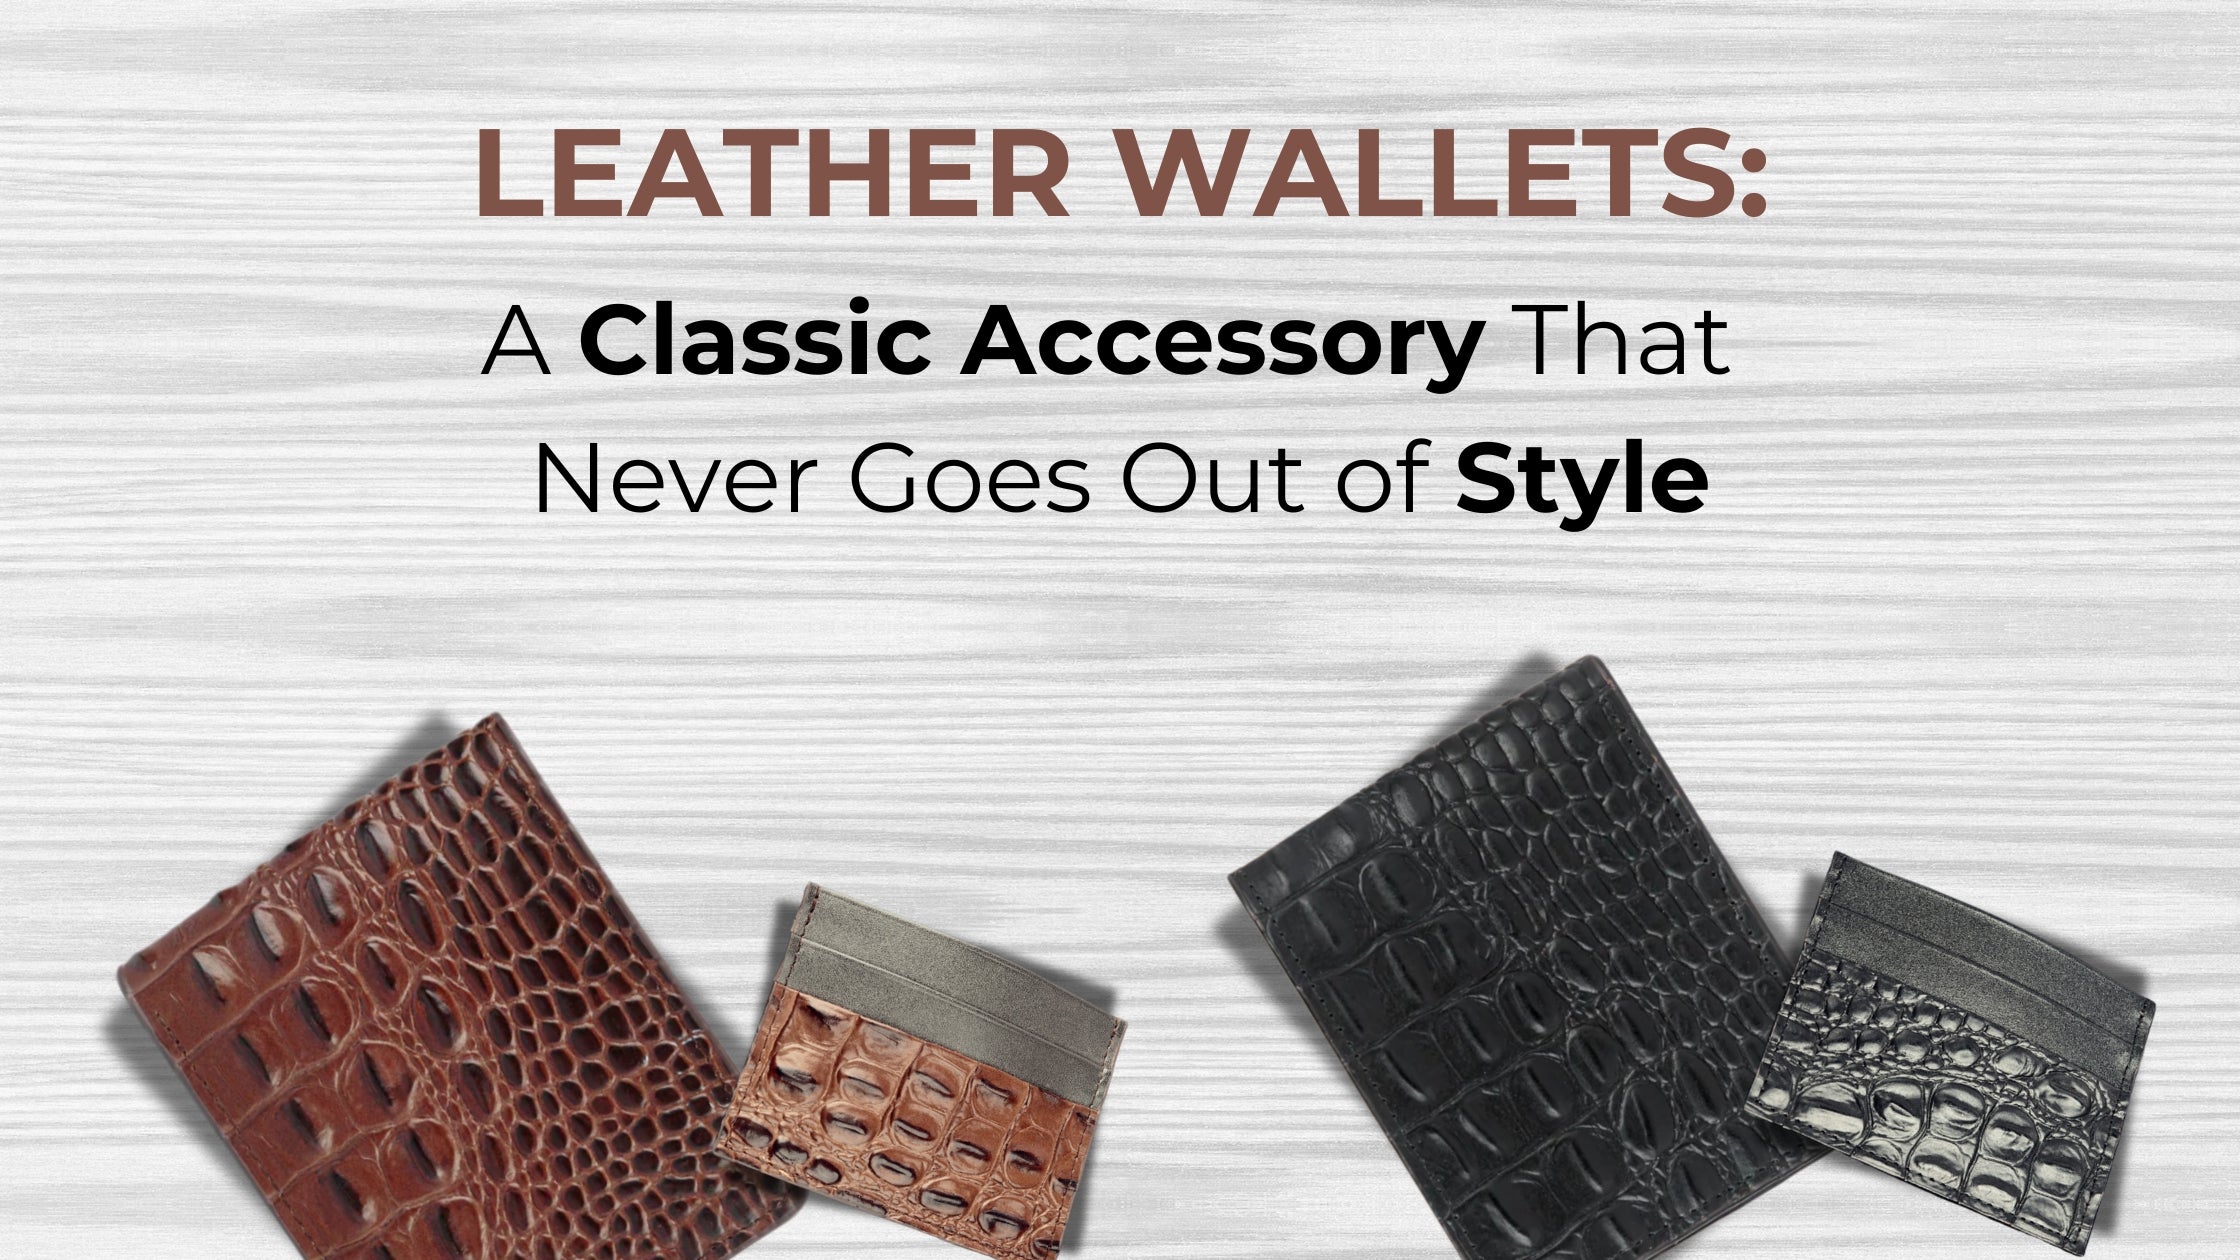 Leather Wallets: A Classic Accessory That Never Goes Out of Style